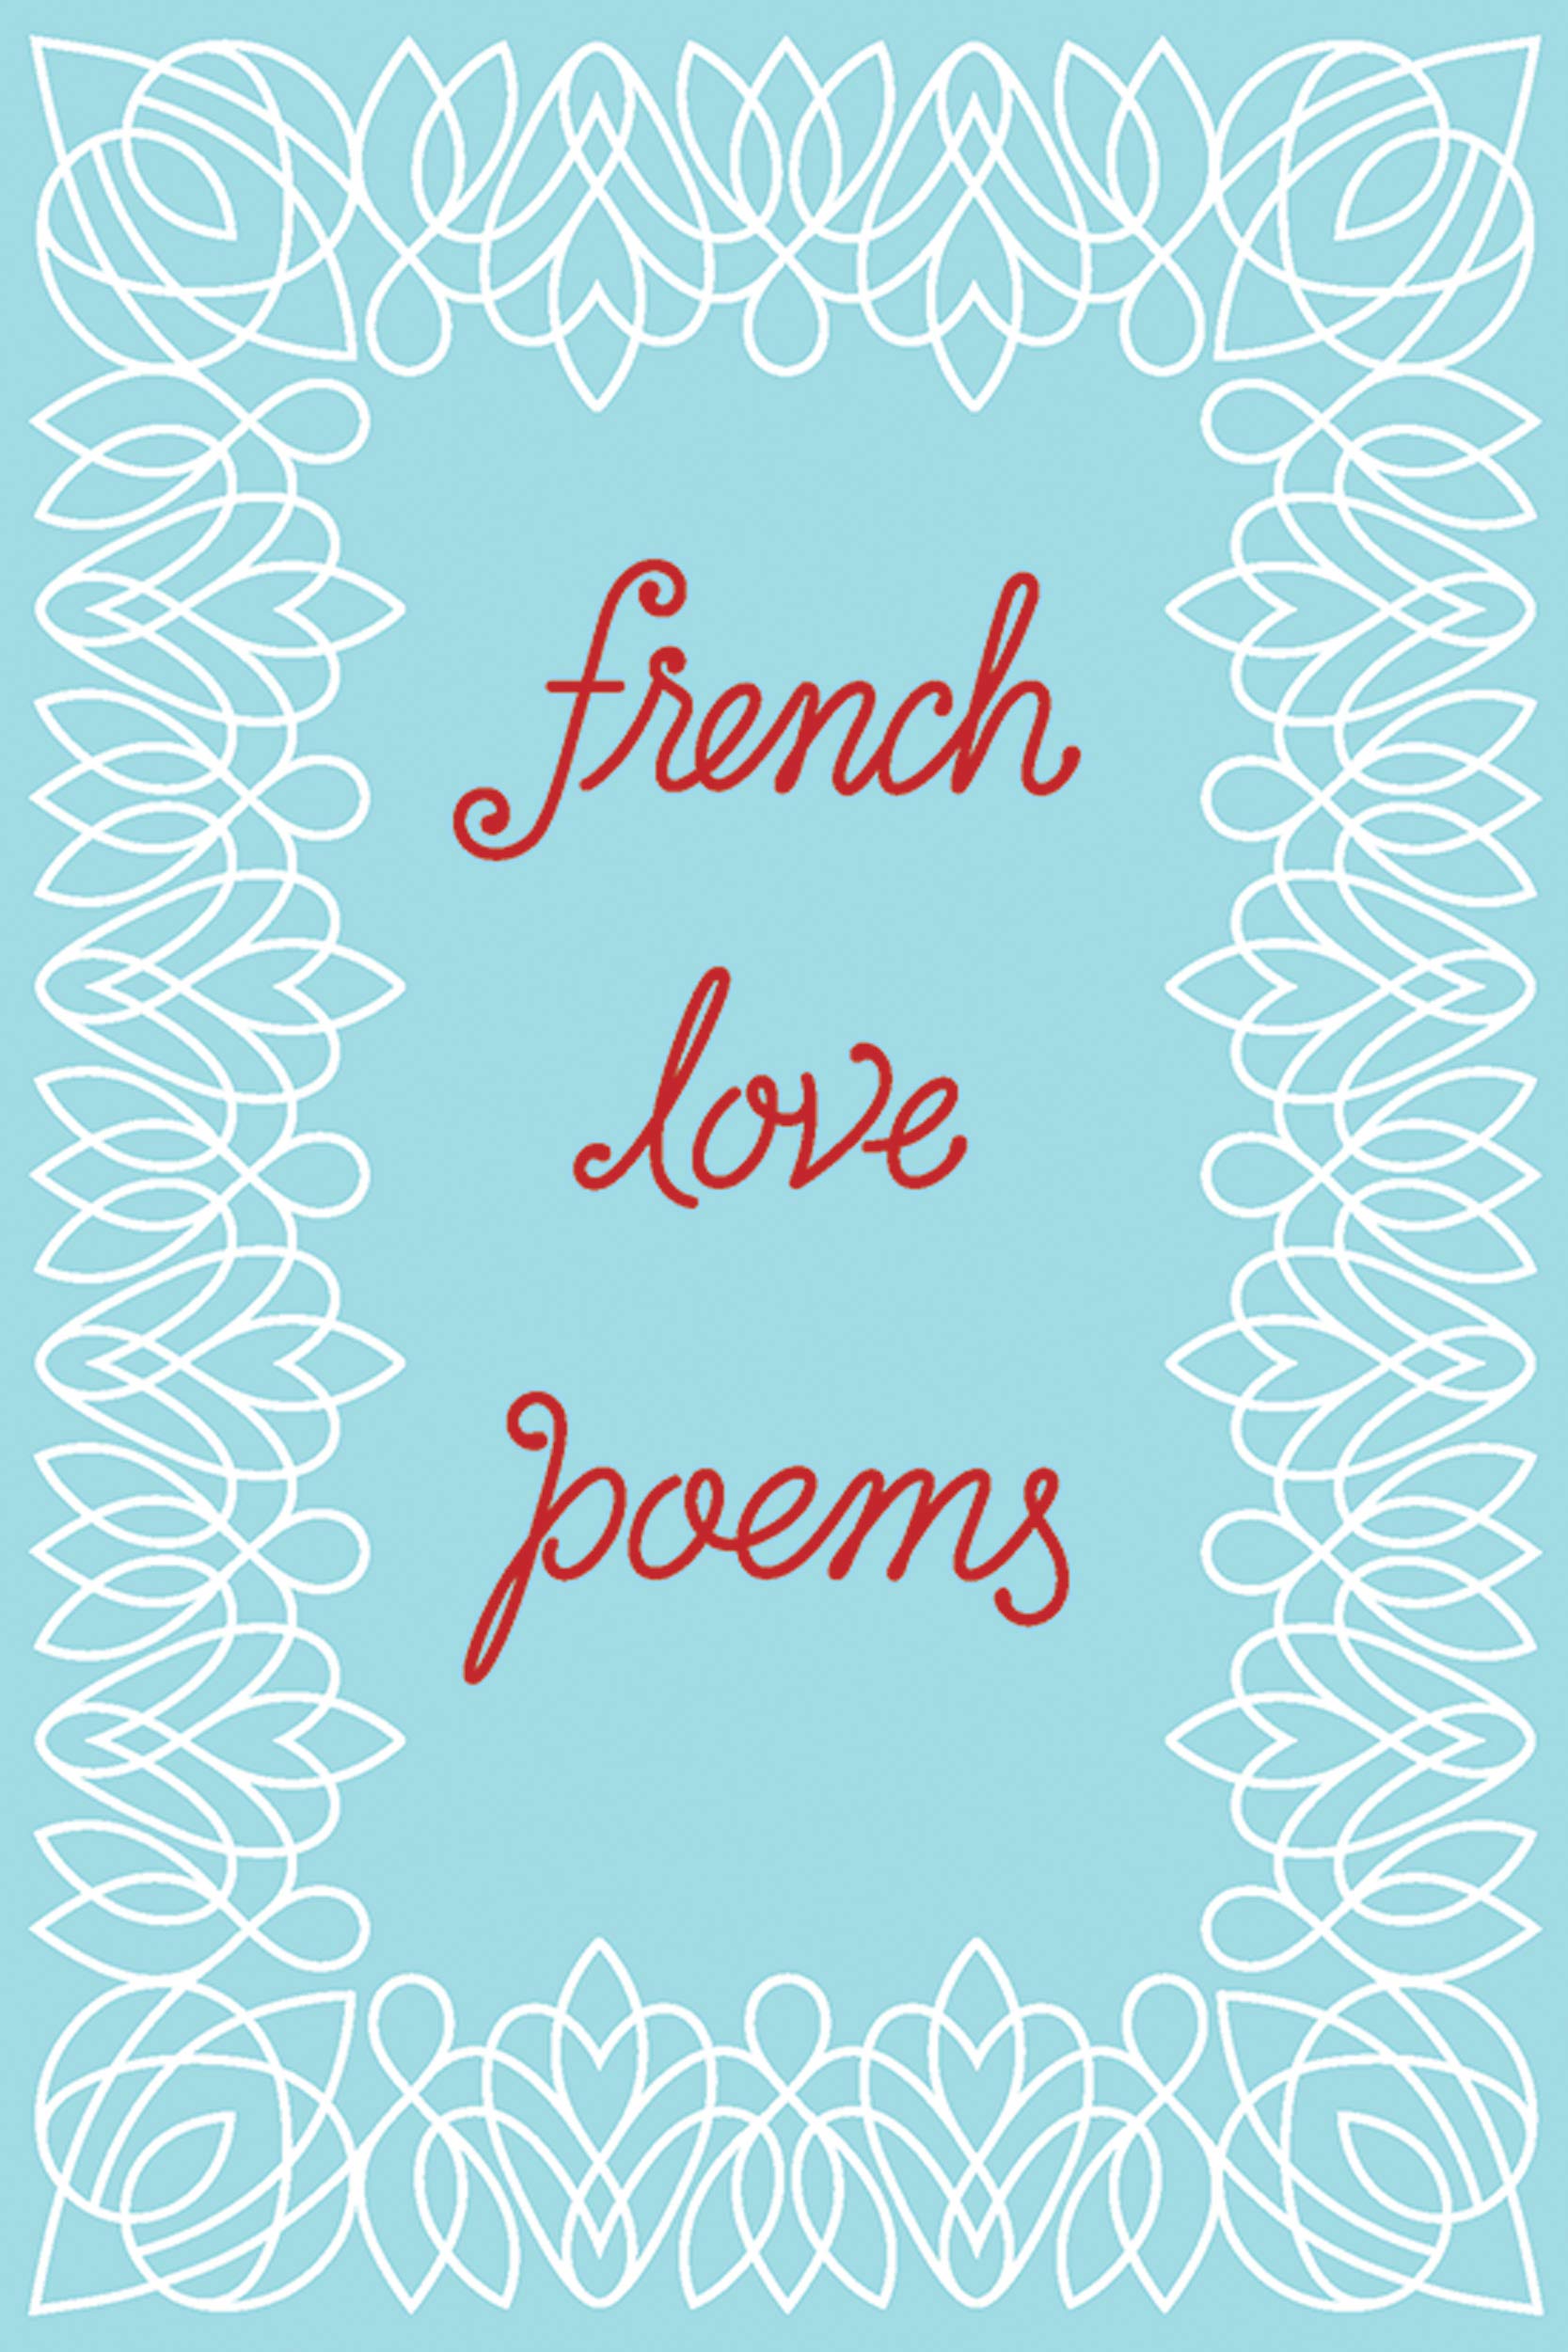 French Love Poems francophile valentine's day gift ideas